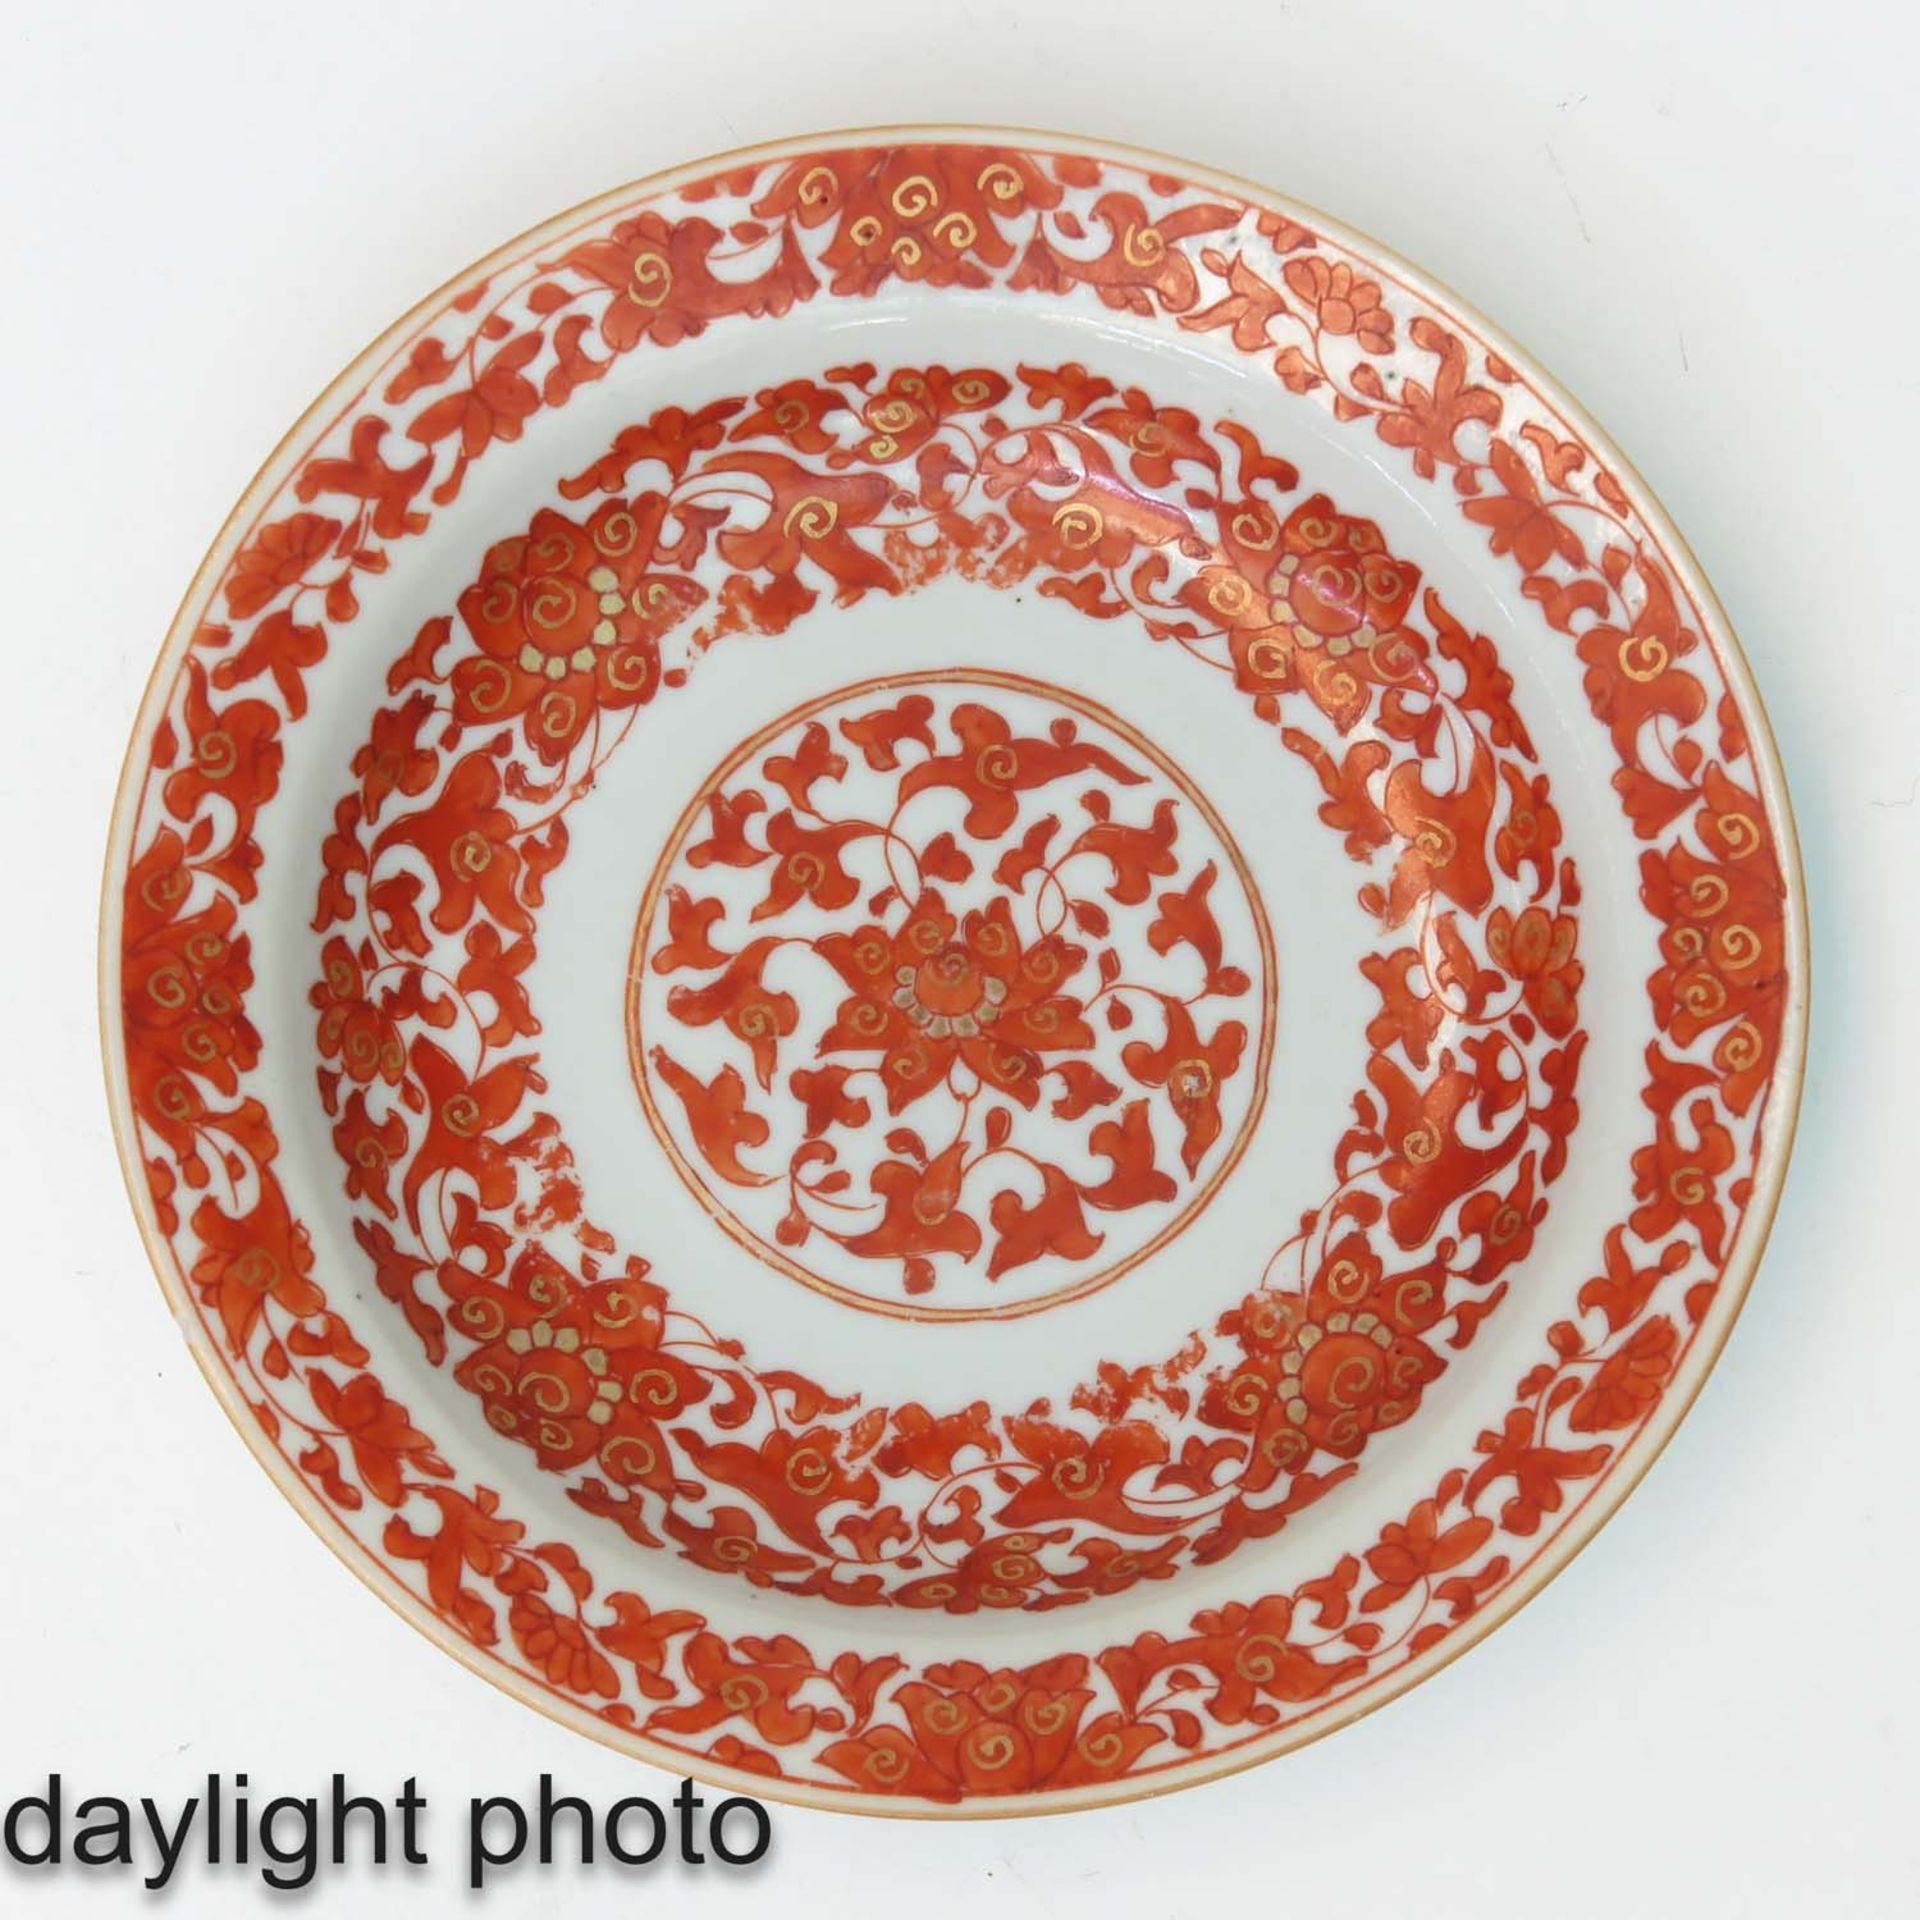 A Series of 3 Small Milk and Blood Decor Plates - Image 9 of 10